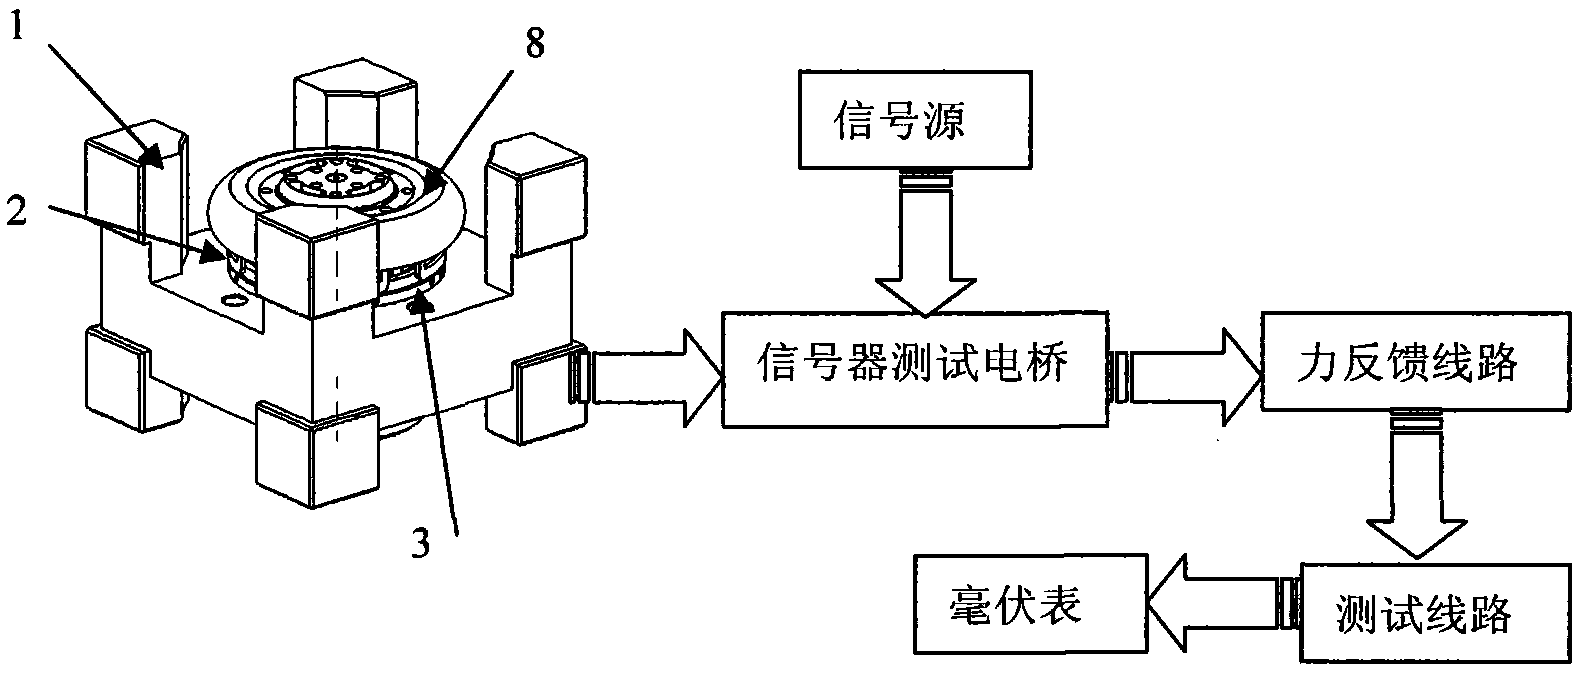 Balance test mould and test method of flexible gyroscope inertia rotor component